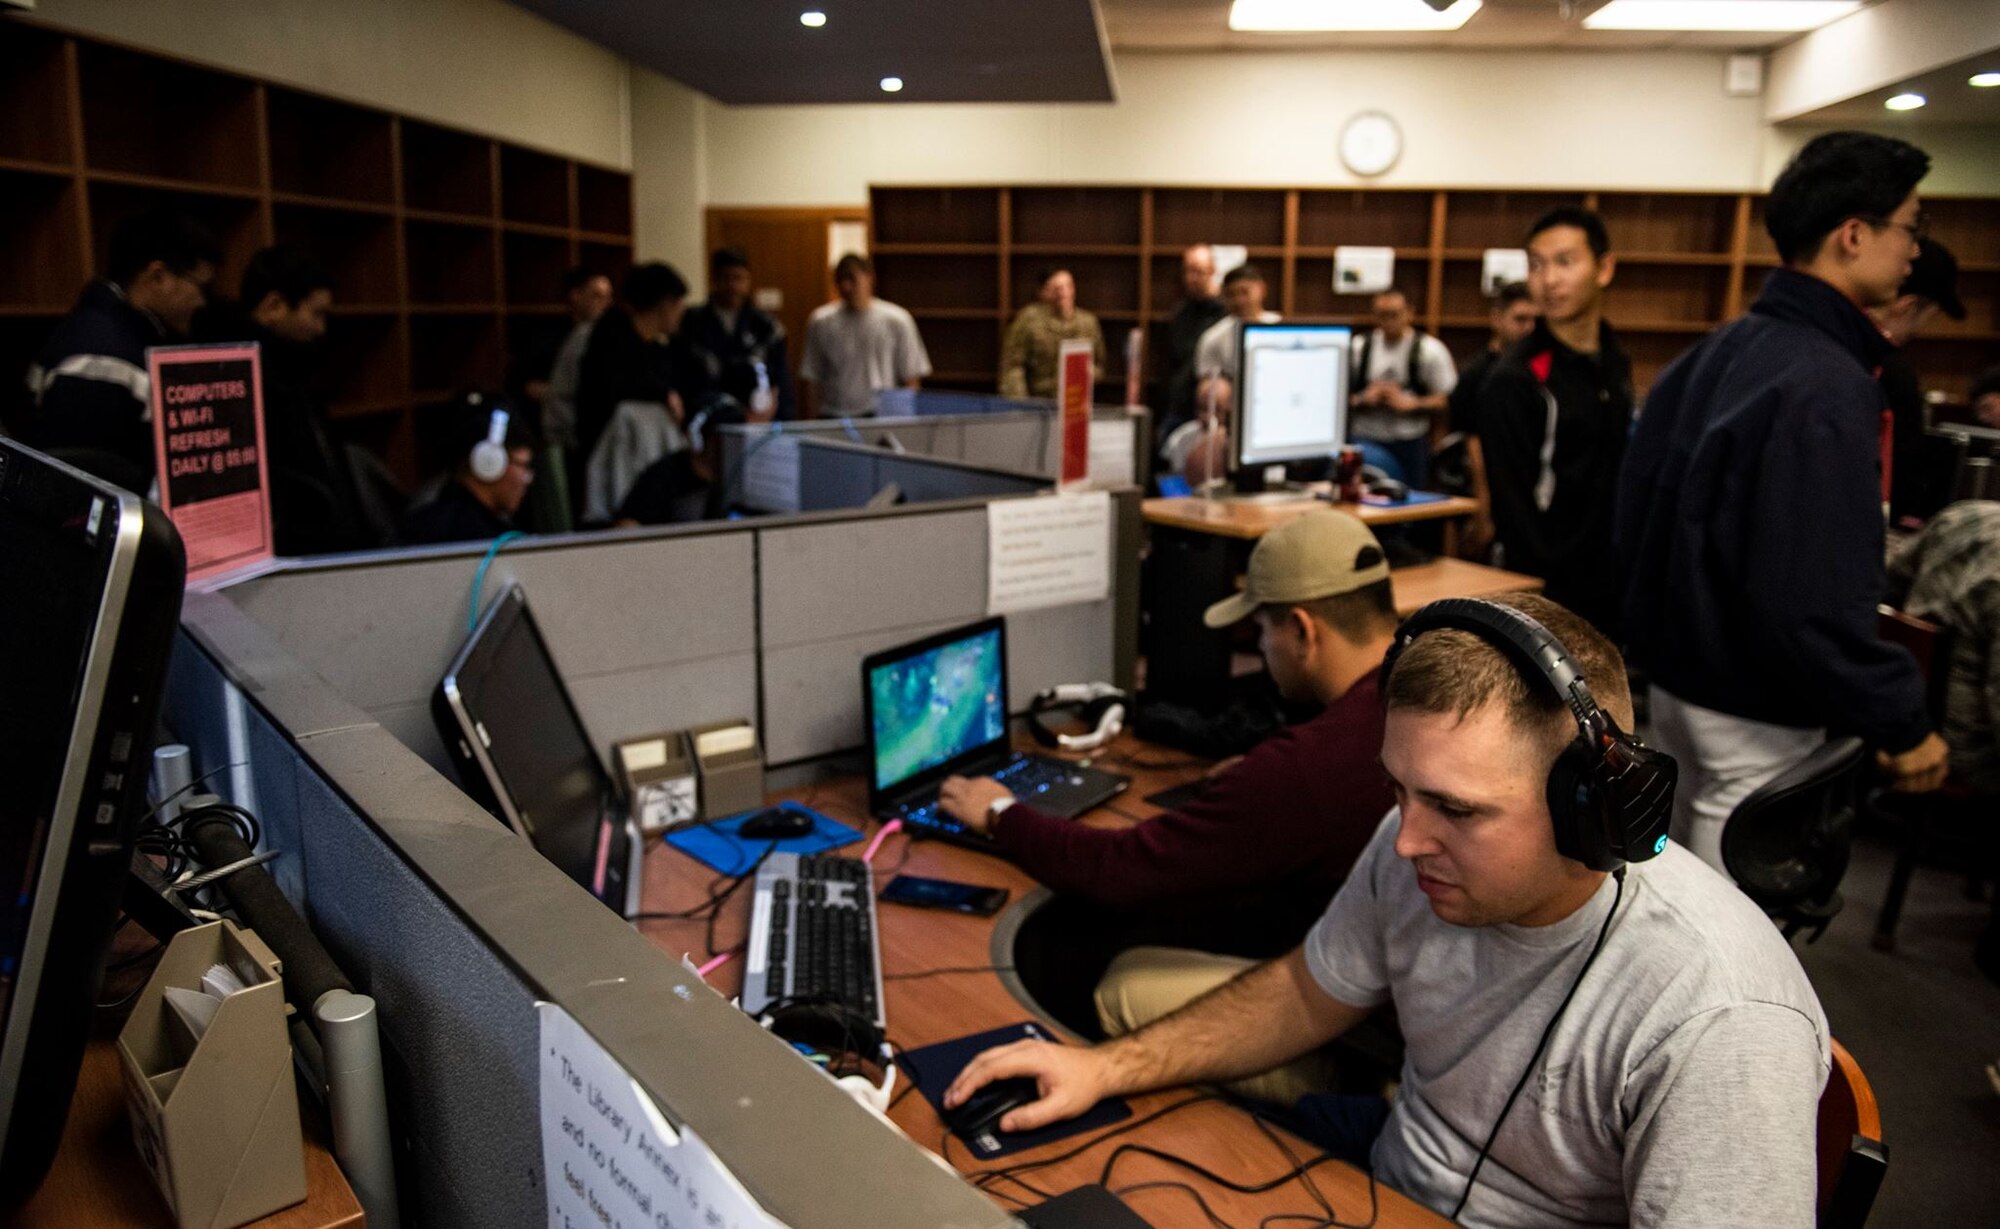 8th Fighter Wing members face off with 38th Fighter Group personnel in a “League of Legends” video game competition at Kunsan Air Base, Republic of Korea, Nov. 9, 2018. The US-ROKAF Friendship Day focused on celebrating the partnership and alliance between the 8th Fighter Wing and 38th Fighter Group, who participated in several sporting events and competitions throughout the day. (U.S. Air Force photo by Senior Airman Stefan Alvarez)